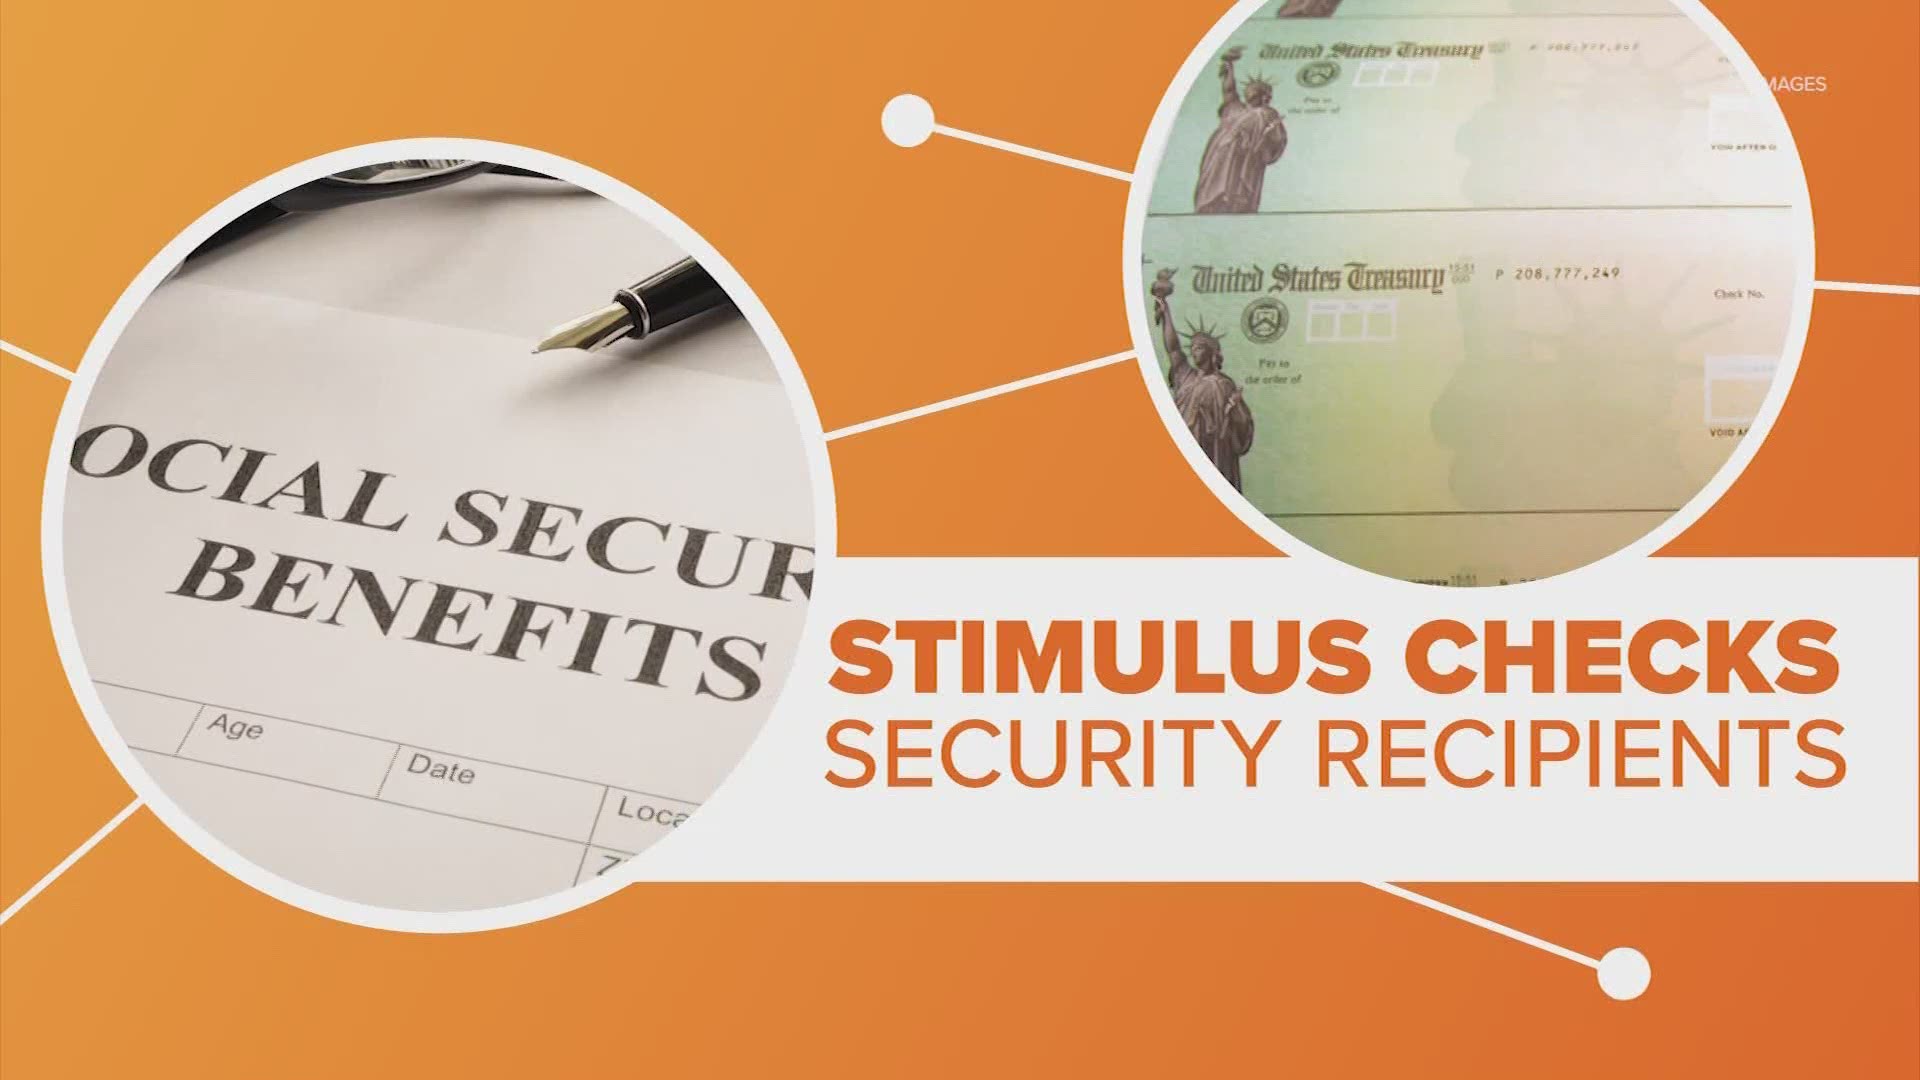 Stimulus checks for social security receipts will soon be on the way after several delays. But there's one group that may have to wait longer: veterans.